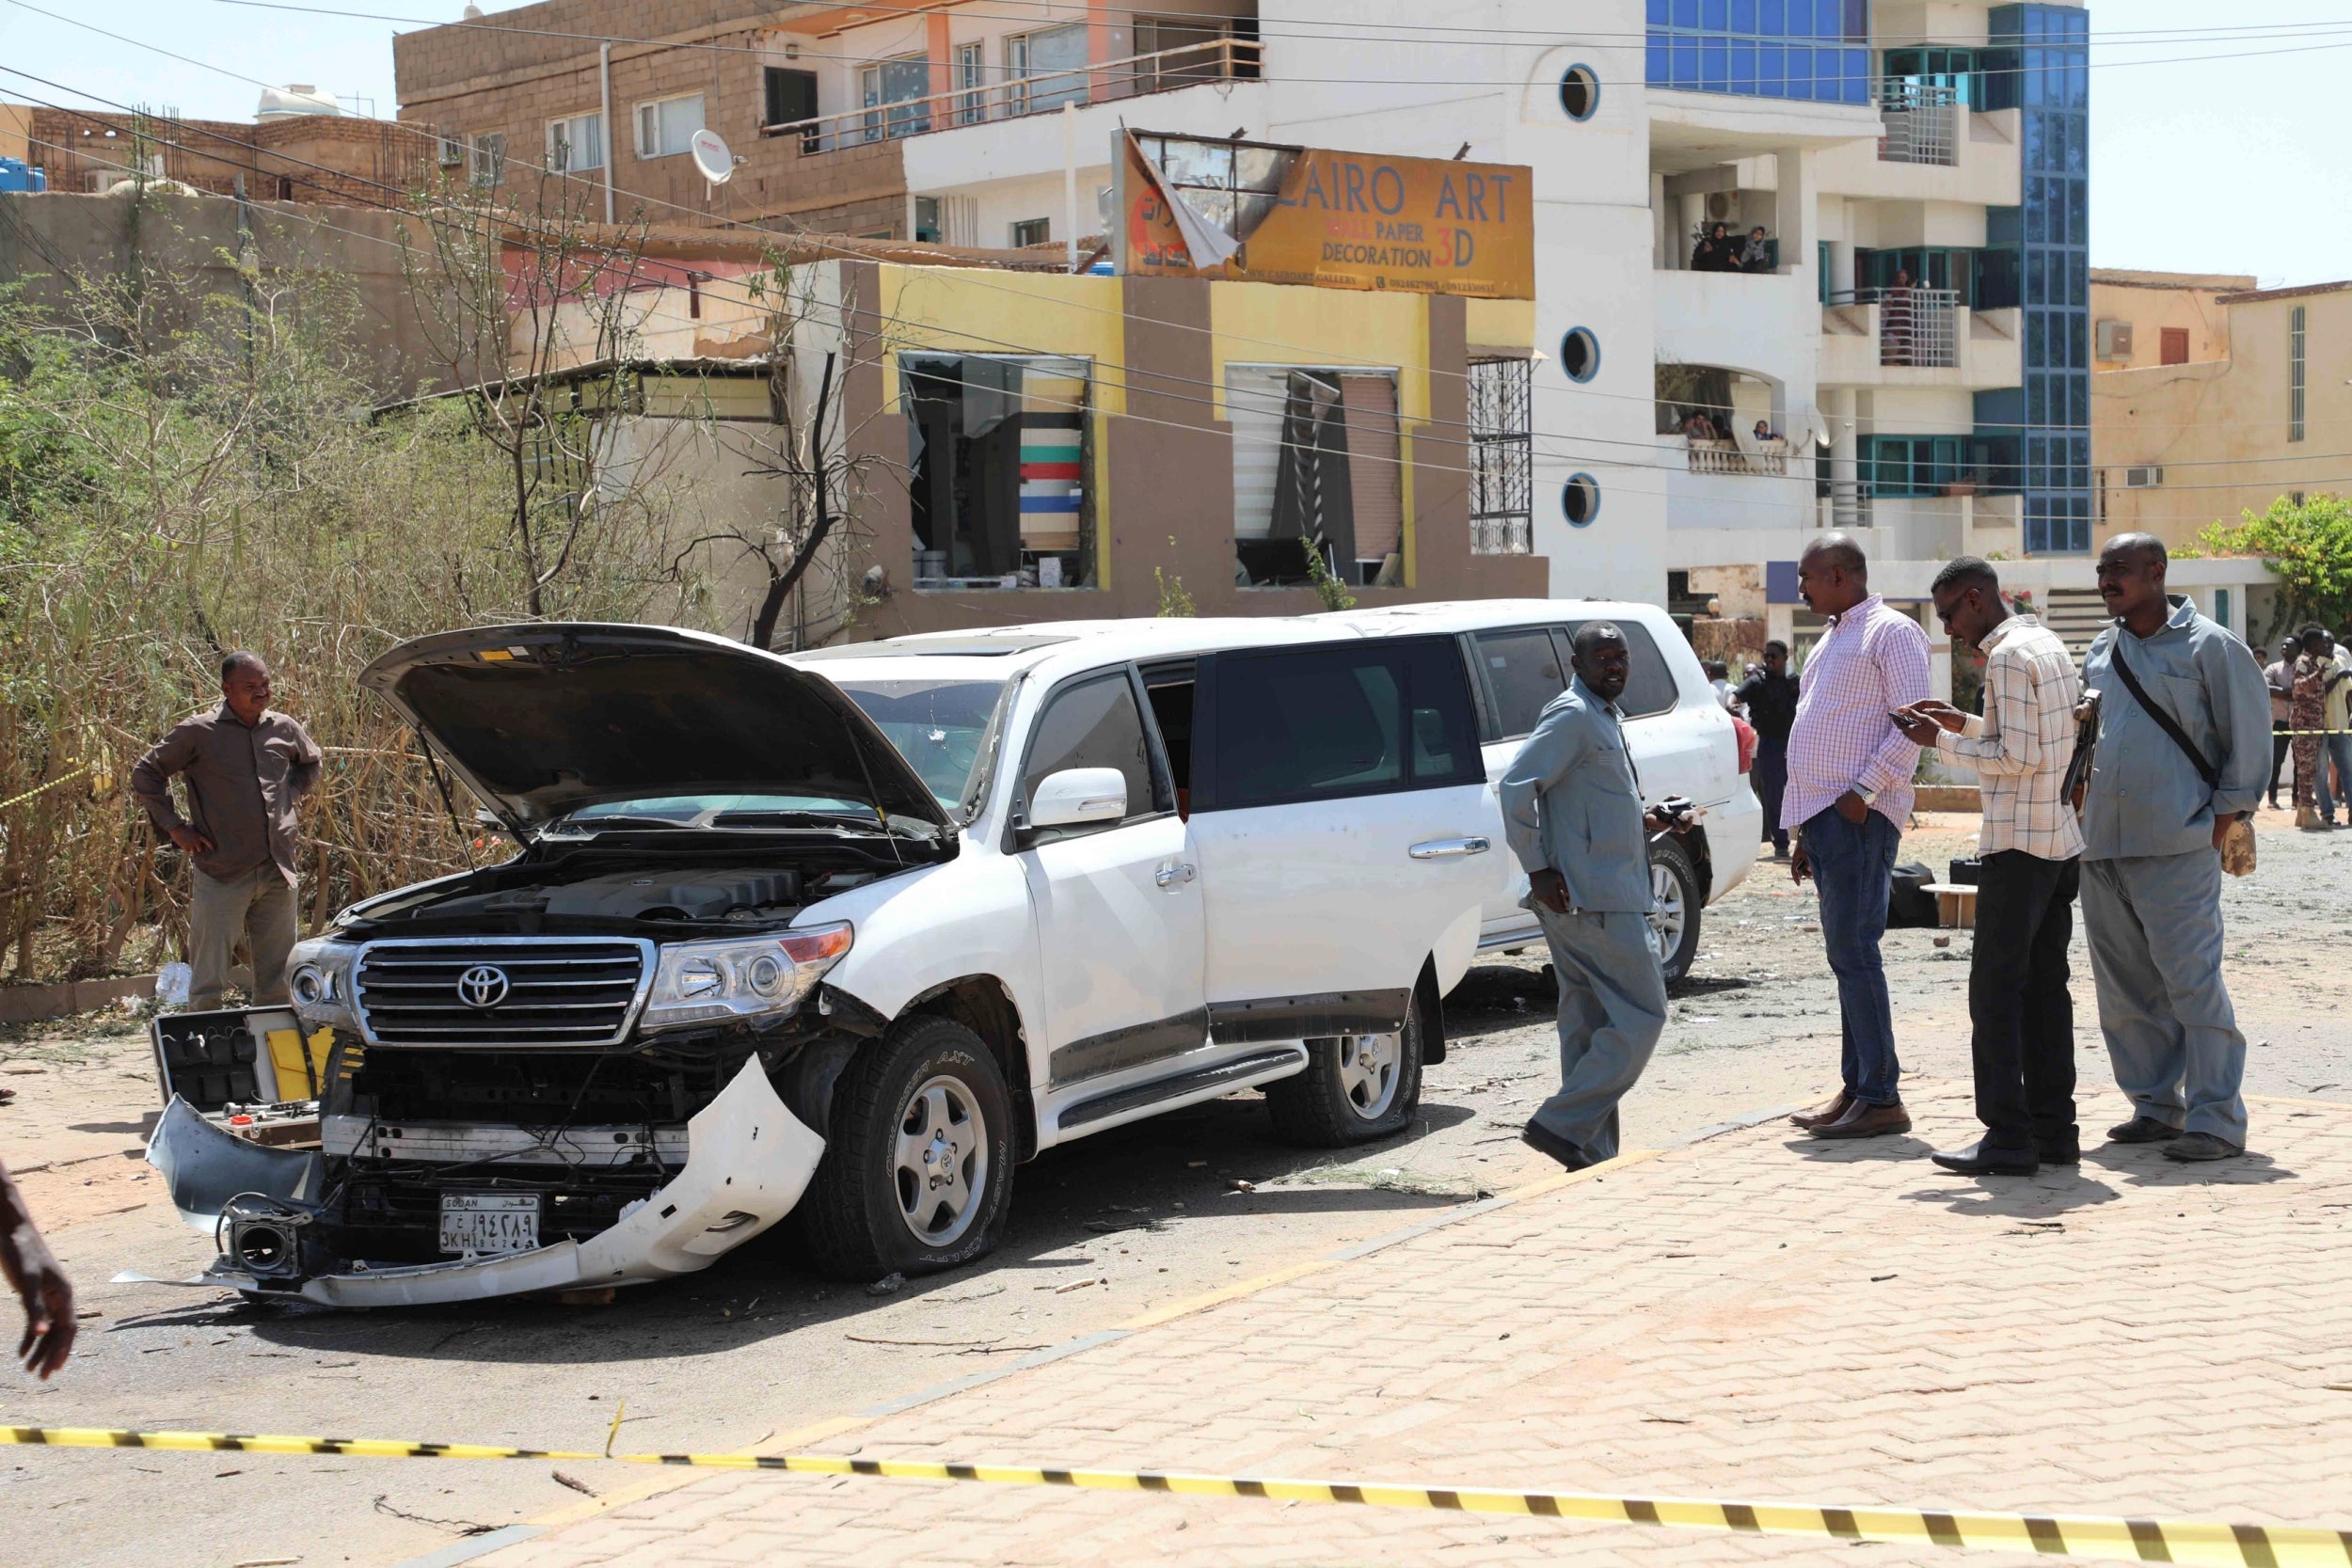 Sudanese police officers assess the damage after an explosion went off near the Sudanese prime minister's convoy